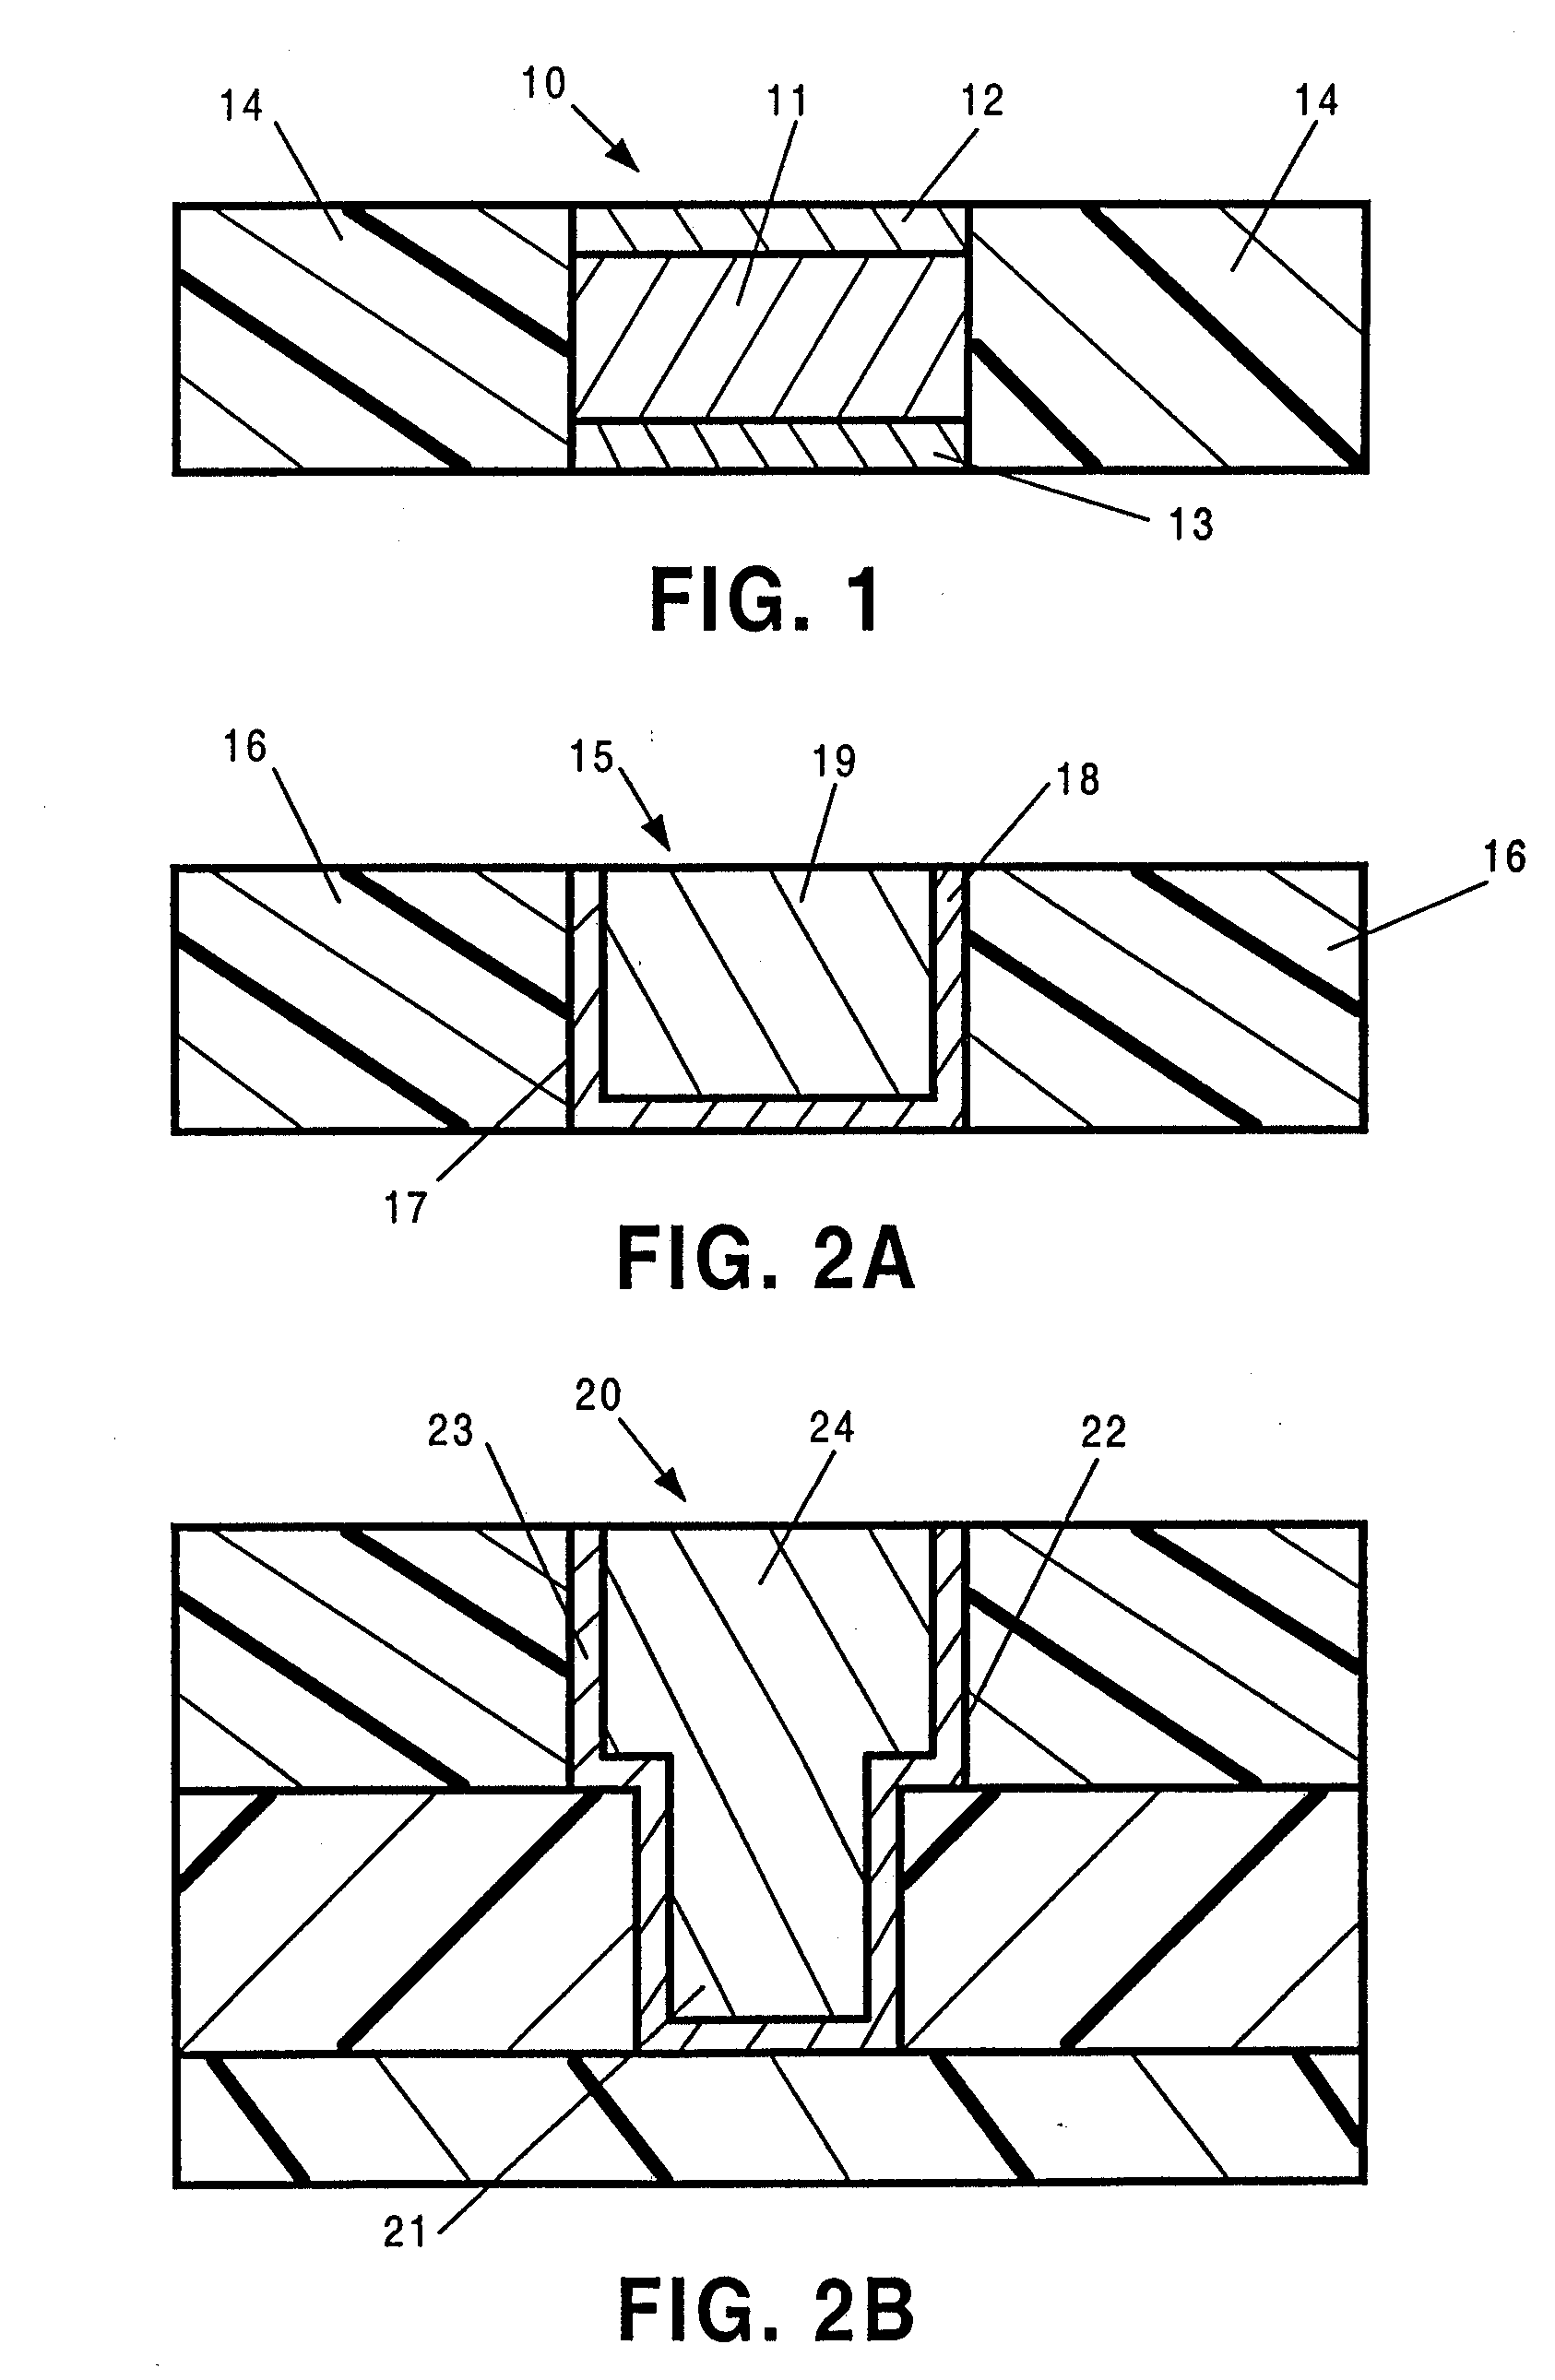 INTERCONNECT STRUCTURE ENCASED WITH HIGH AND LOW k INTERLEVEL DIELECTRICS